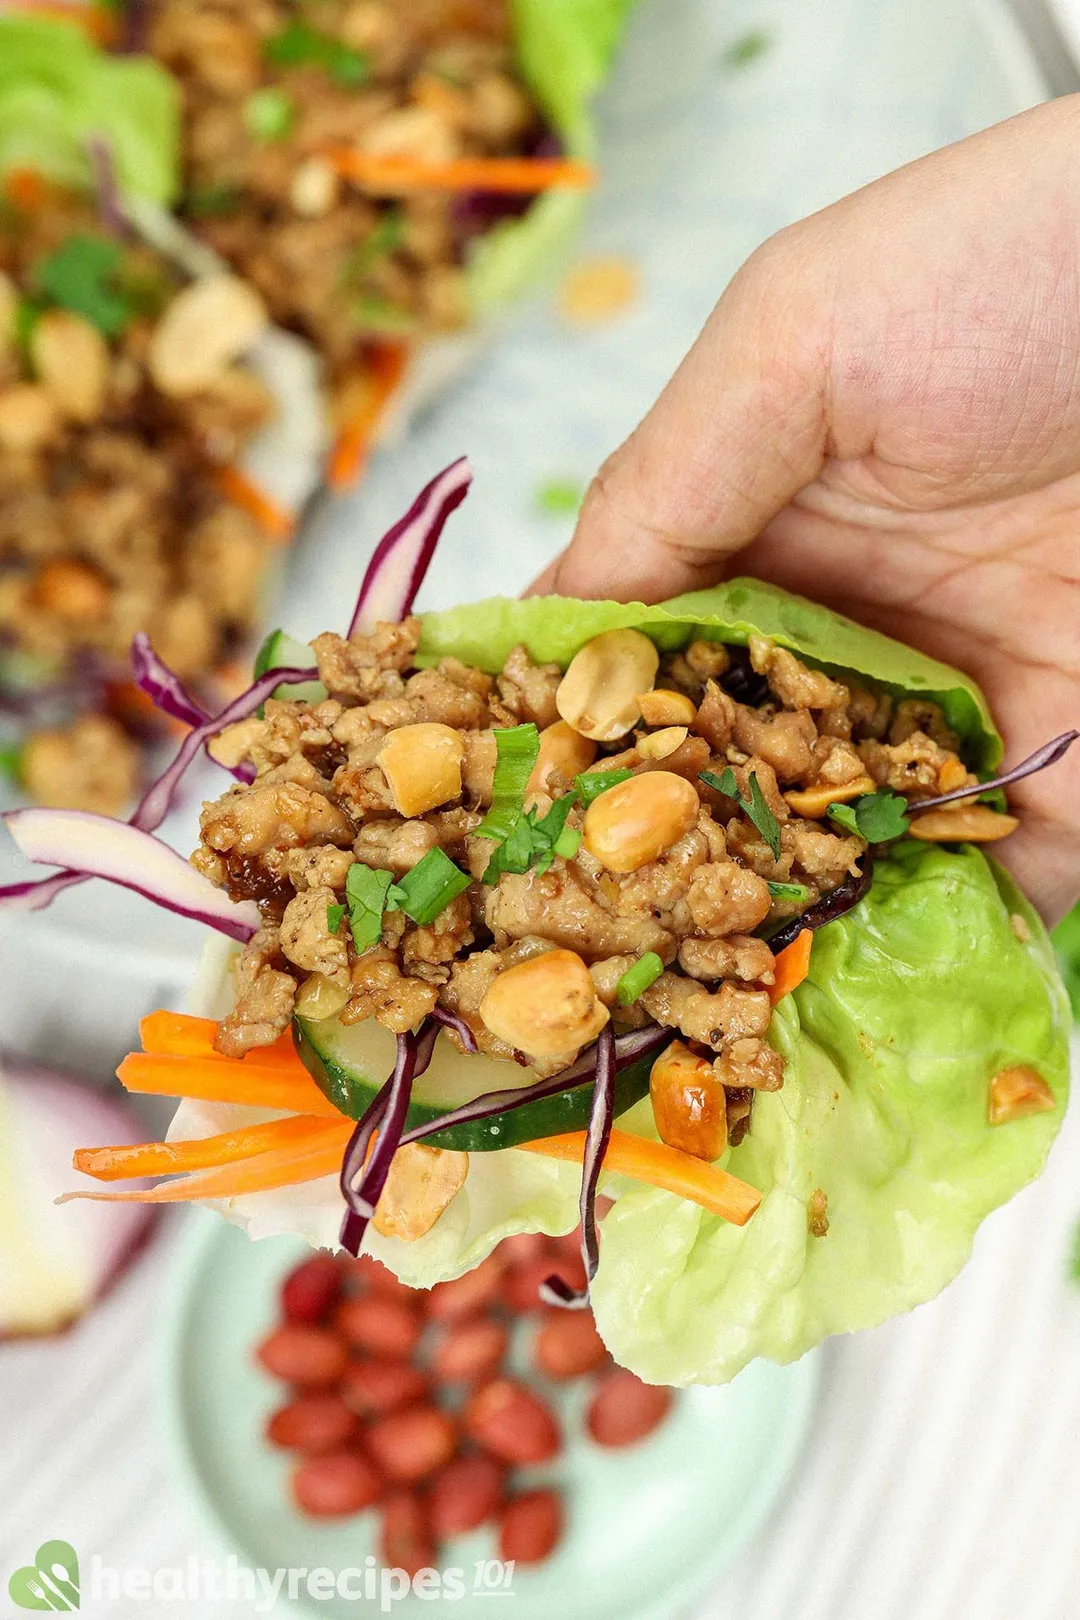 A hand holding a lettuce leaf filled with ground meat, julienned carrots, shredded red cabbage, and peanuts